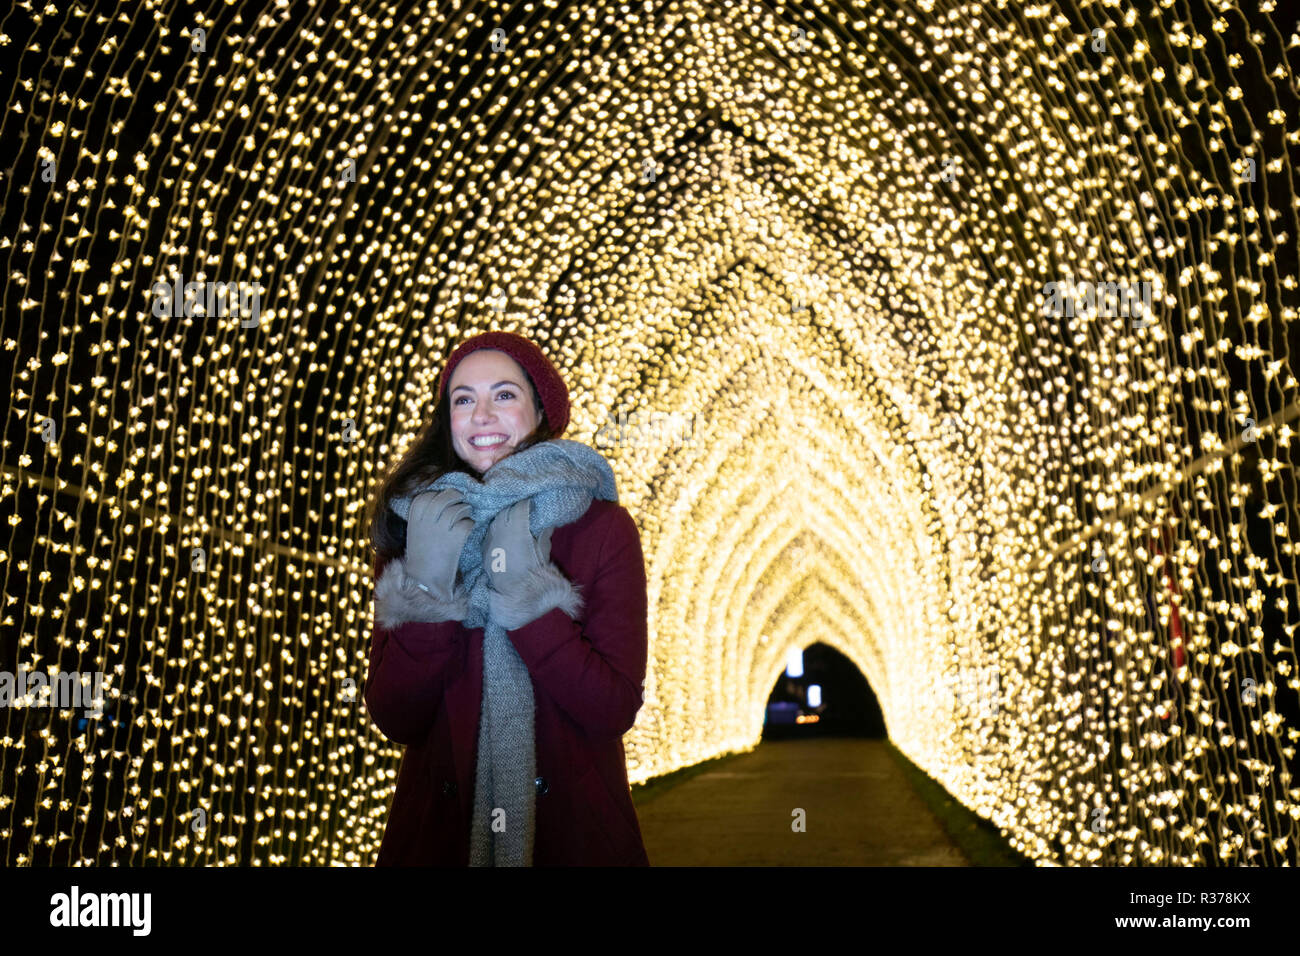 A lady looks at over one million lights that are illuminated, as part of Kew Garden's after-dark landscape trail at the Royal Botanic Gardens in Richmond. Stock Photo